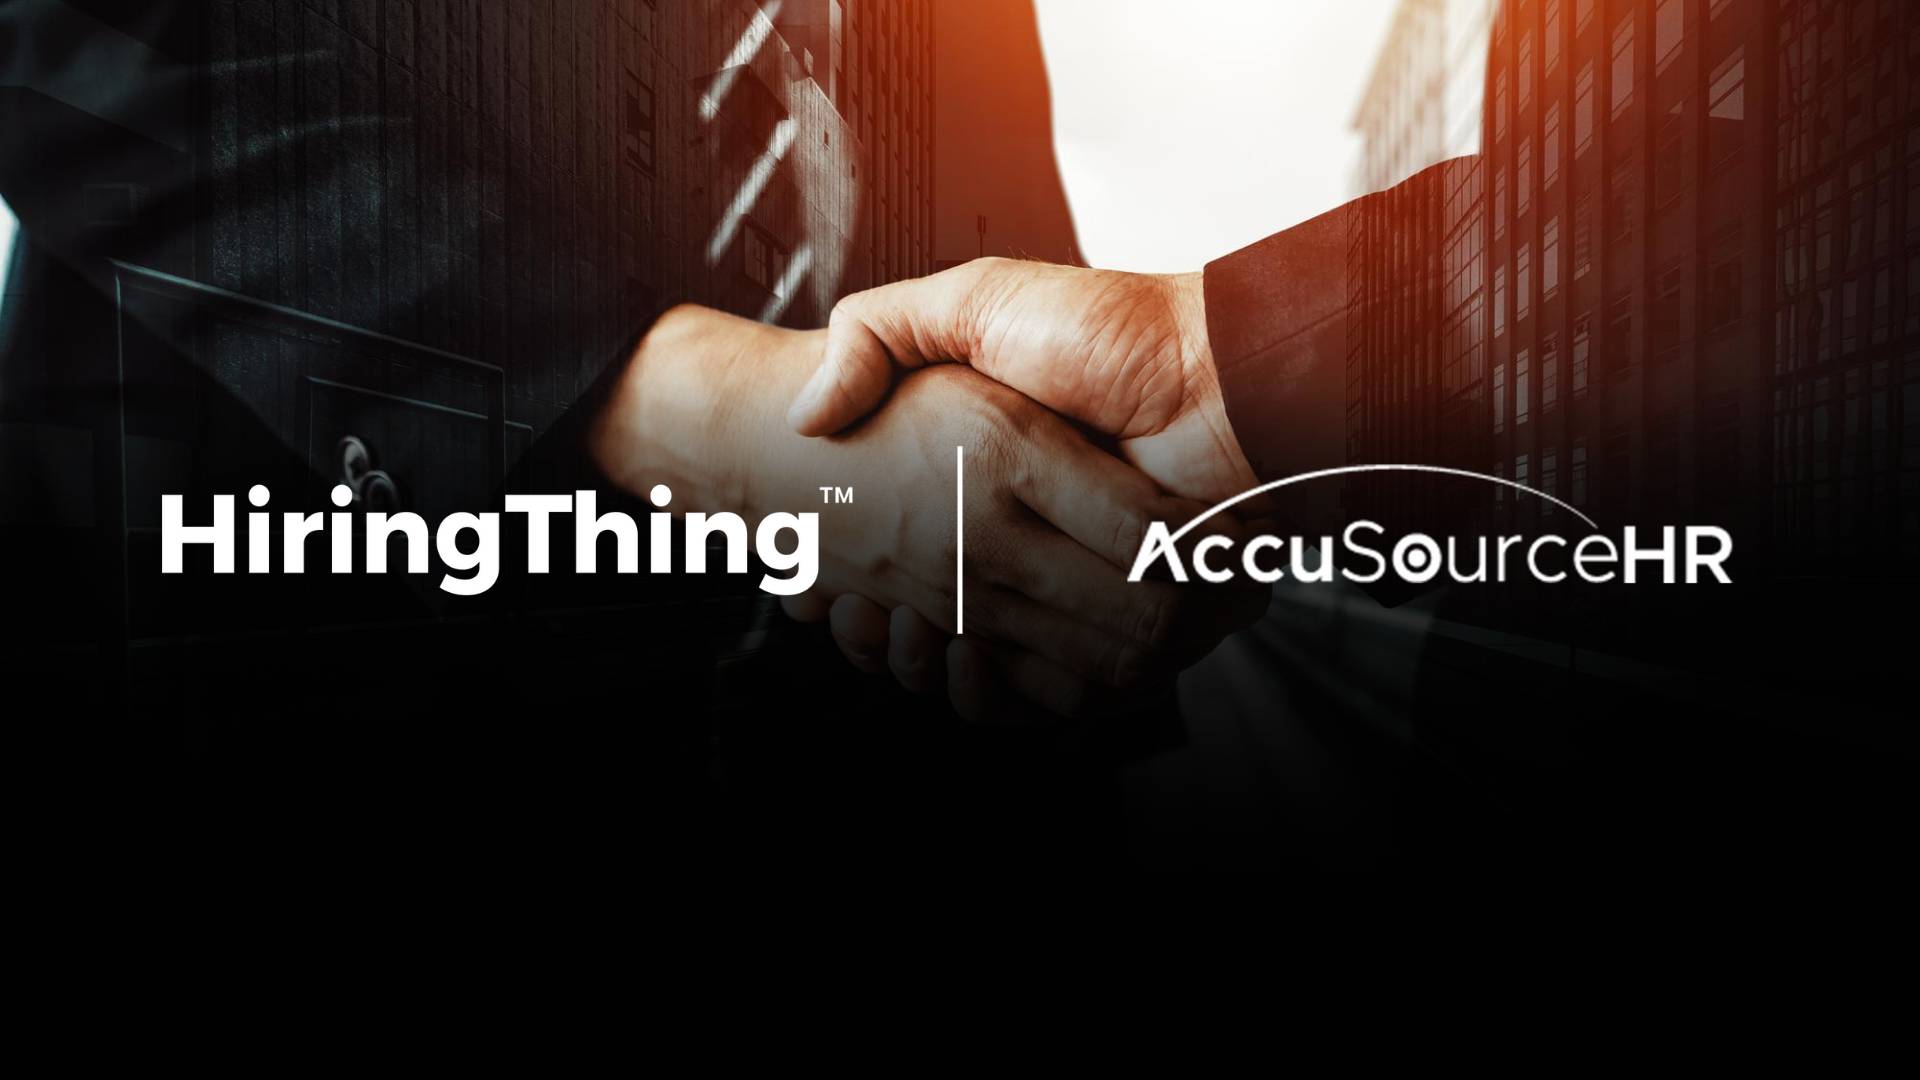 "HiringThing Partners with AccuSourceHR to Enhance Background Screening in Recruitment Process"